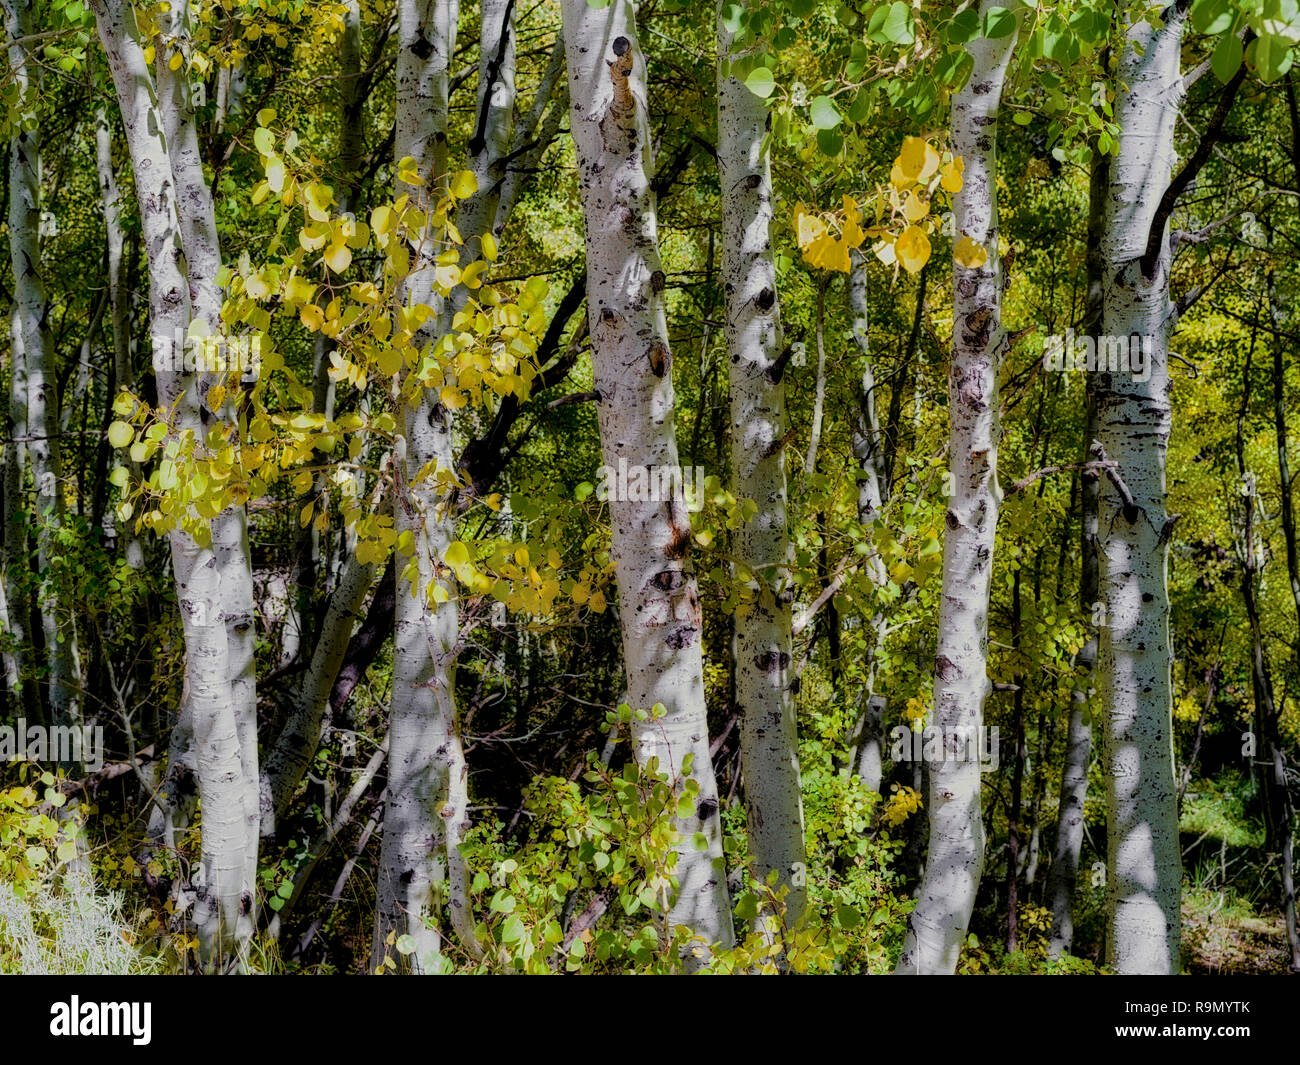 Aspen or Birch tree grove in Autumn with a mixture of yellow and green leaves. Stock Photo